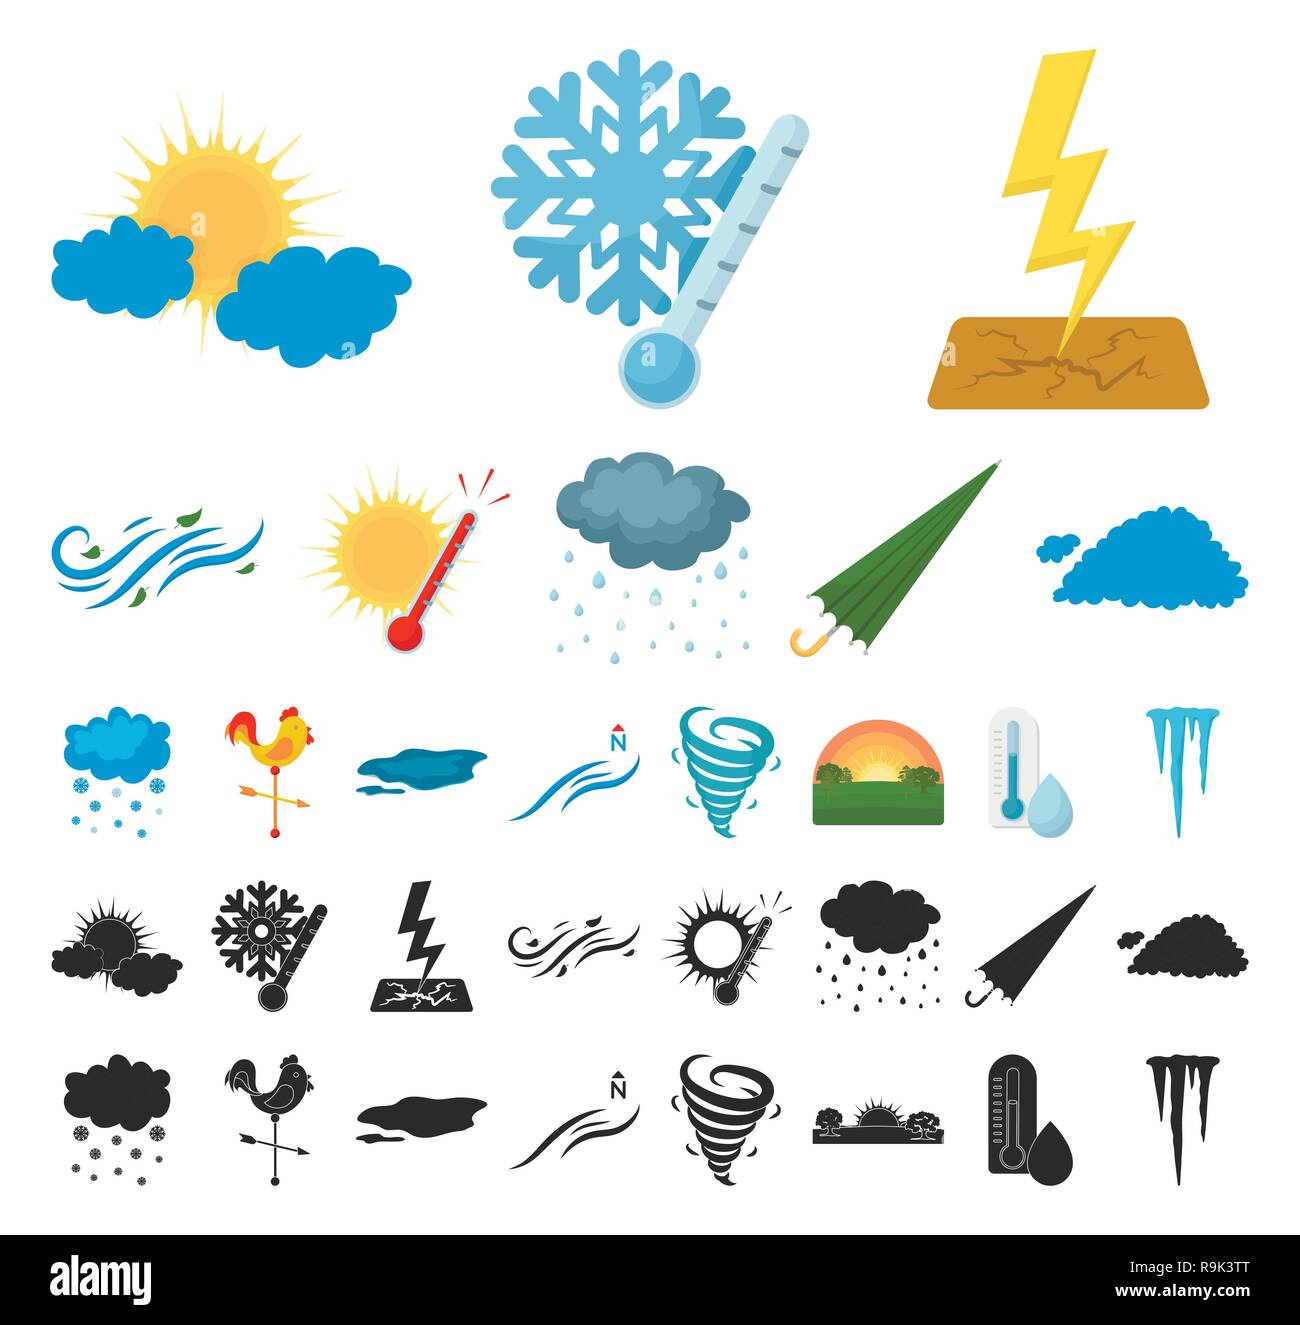 art,atmosphere,cartoon,black,characteristics,clear,cloud,cloudy,cold,collection,cyclone,damp,day,design,different,frost,heat,icicles,icon,illustration,isolated,lightning,logo,meteorology,northern,precipitation,puddle,rain,rainy,season,set,sign,snowfall  ...